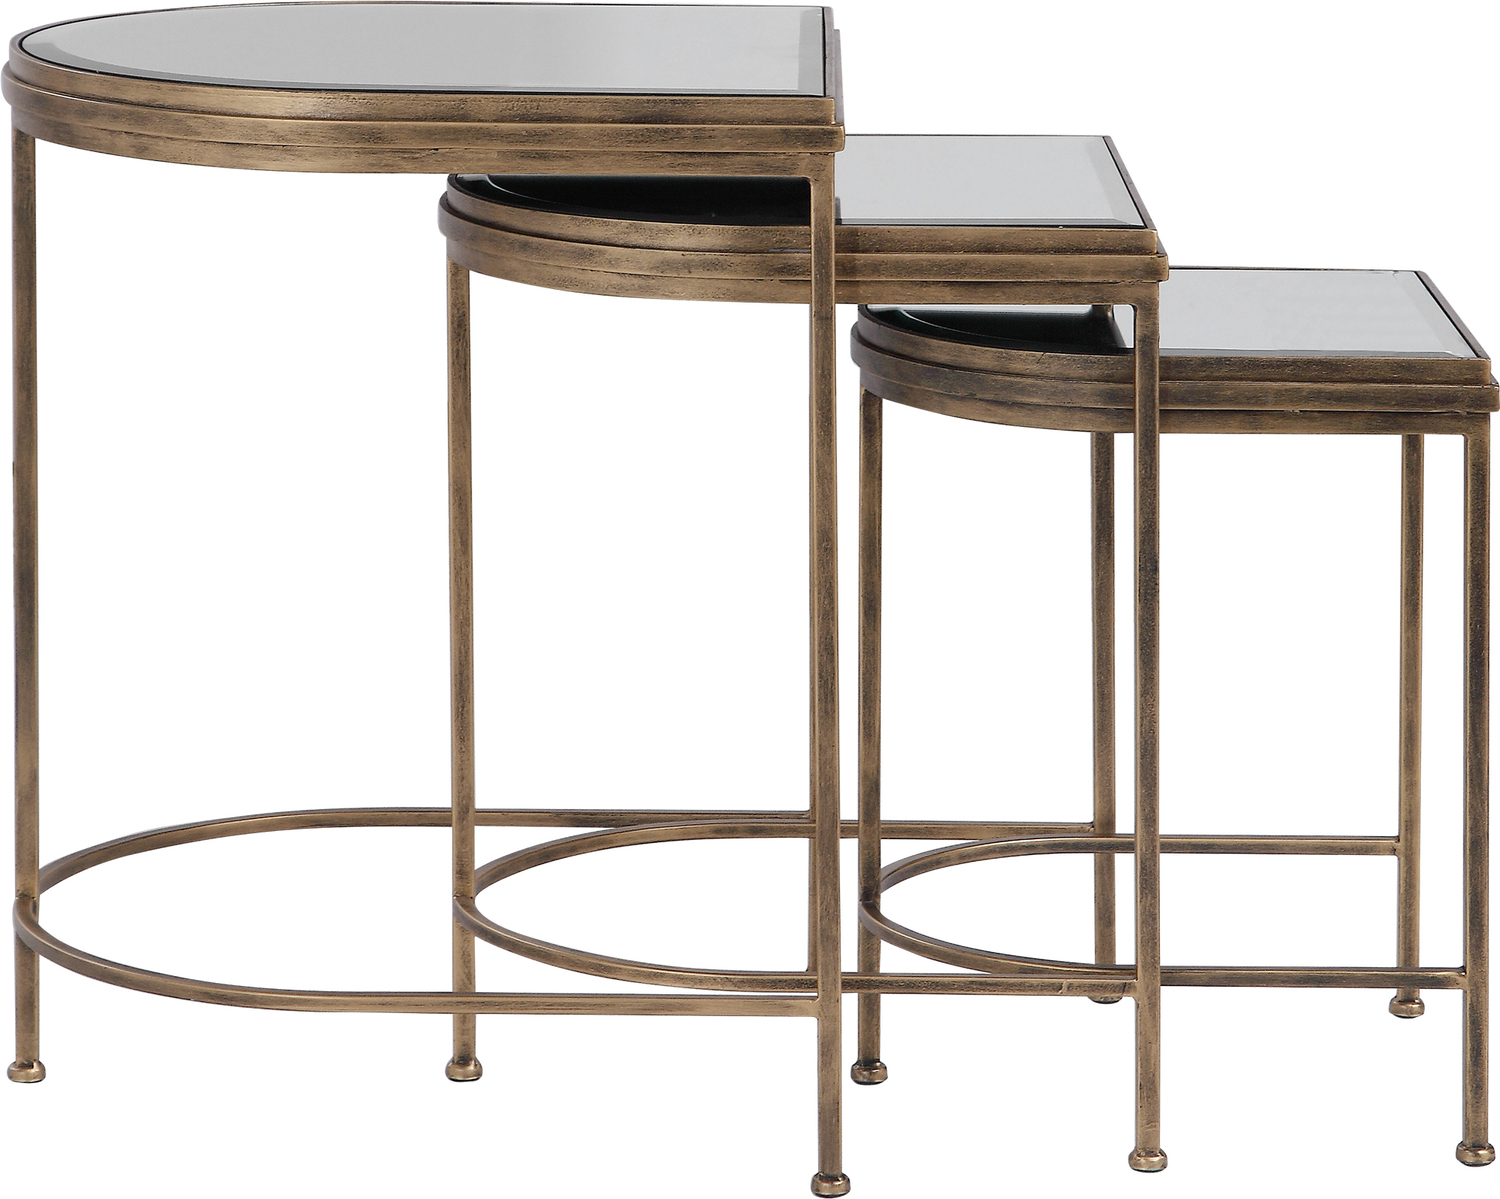 brown glass coffee table Uttermost Accent & End Tables Set Of Three Nesting Tables With An Elegantly Curved Hand Forged Iron Frame, Finished In Antique Brushed Gold With Beveled Mirror Tops.